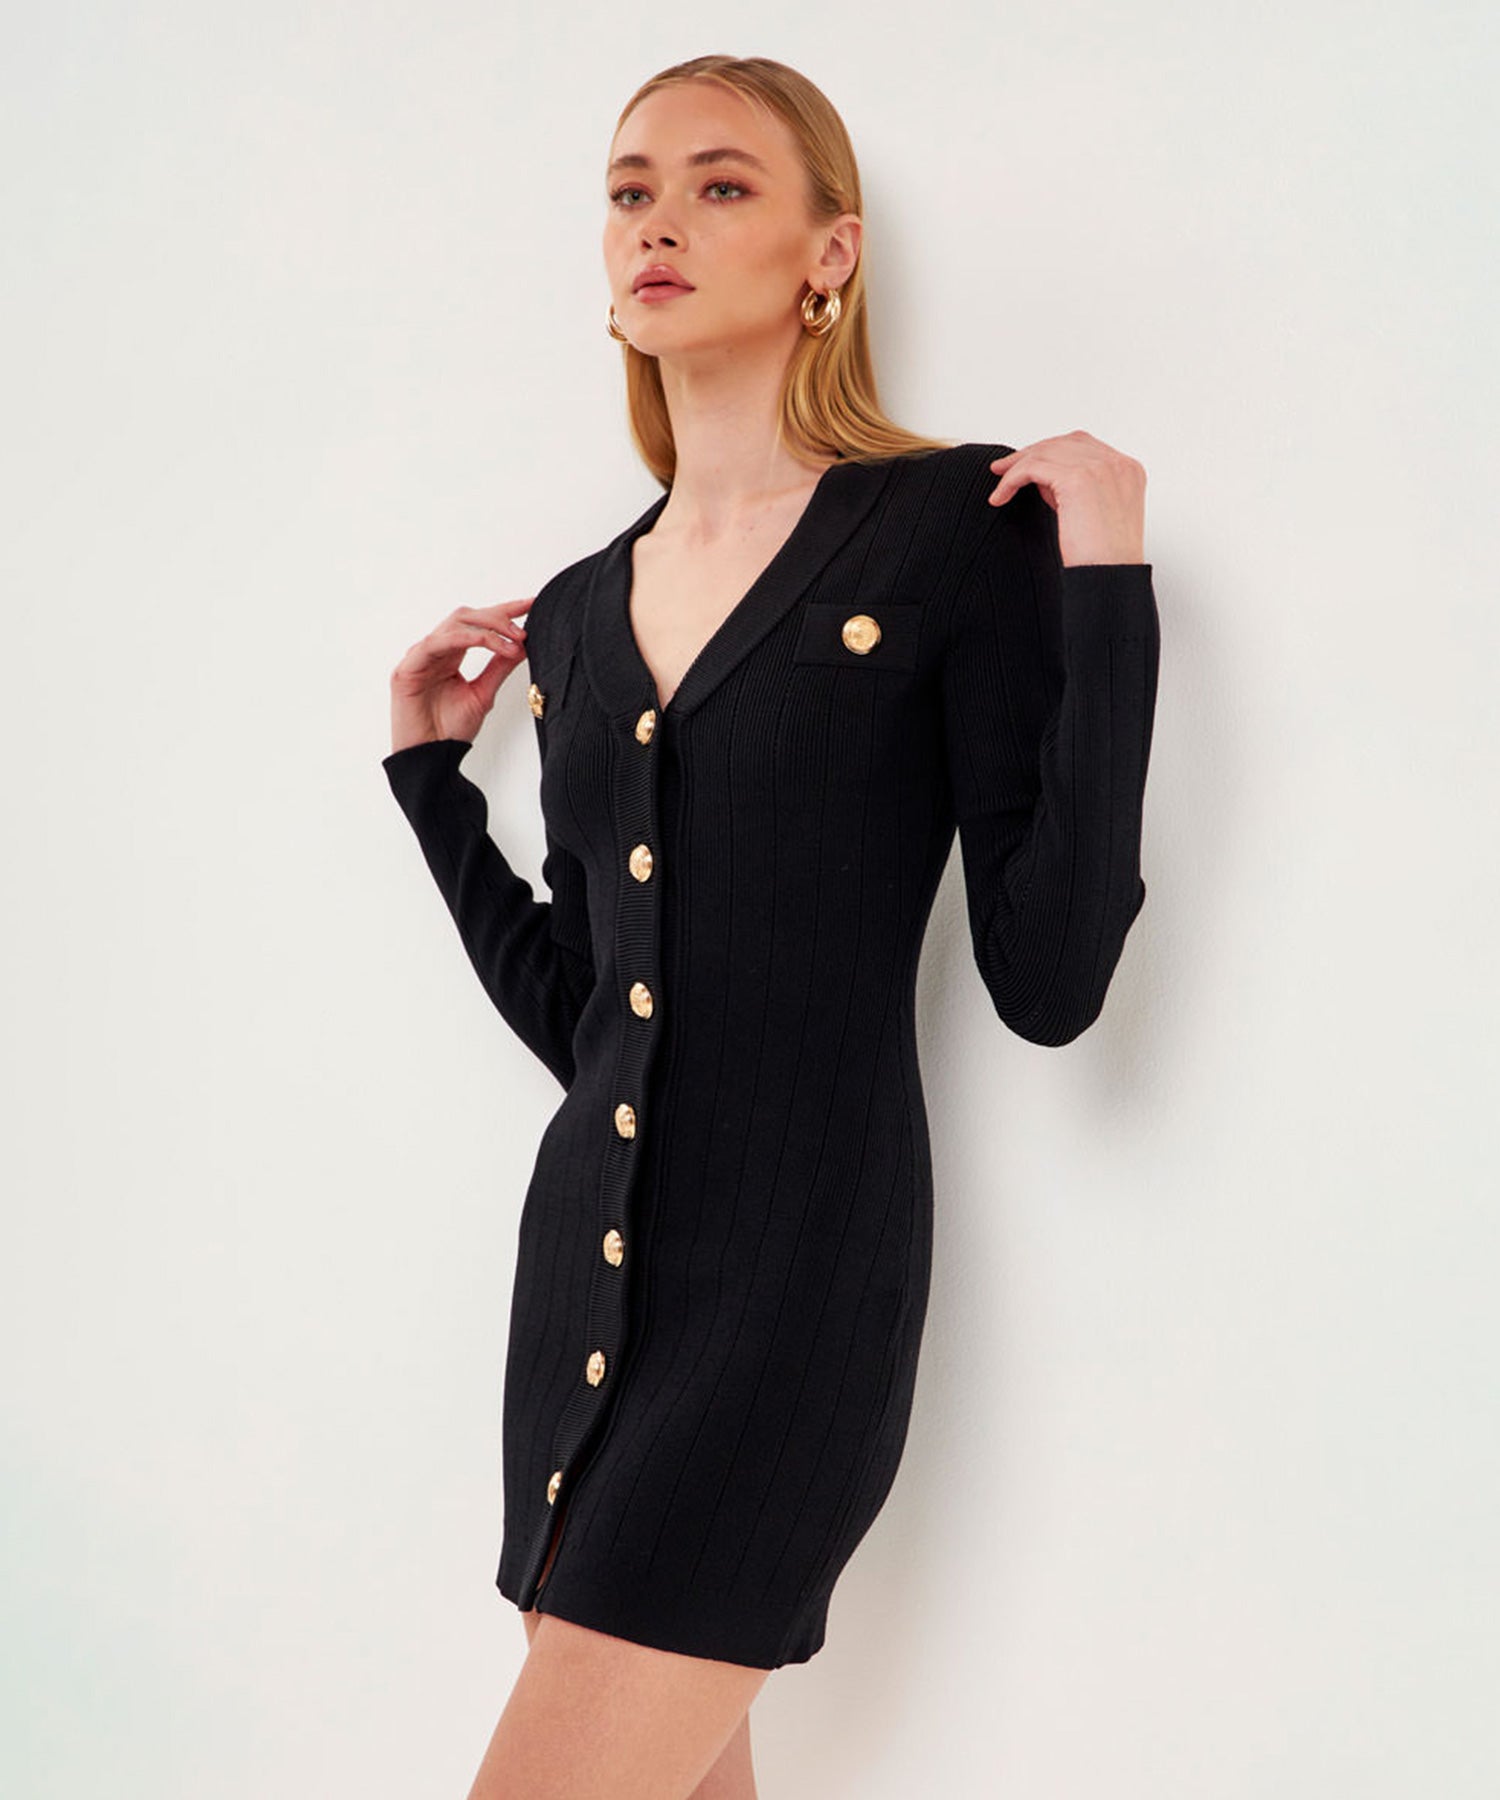 Discover eternally elegant collection shop wardrobe essentials in Women's Clothing at objectrare.com